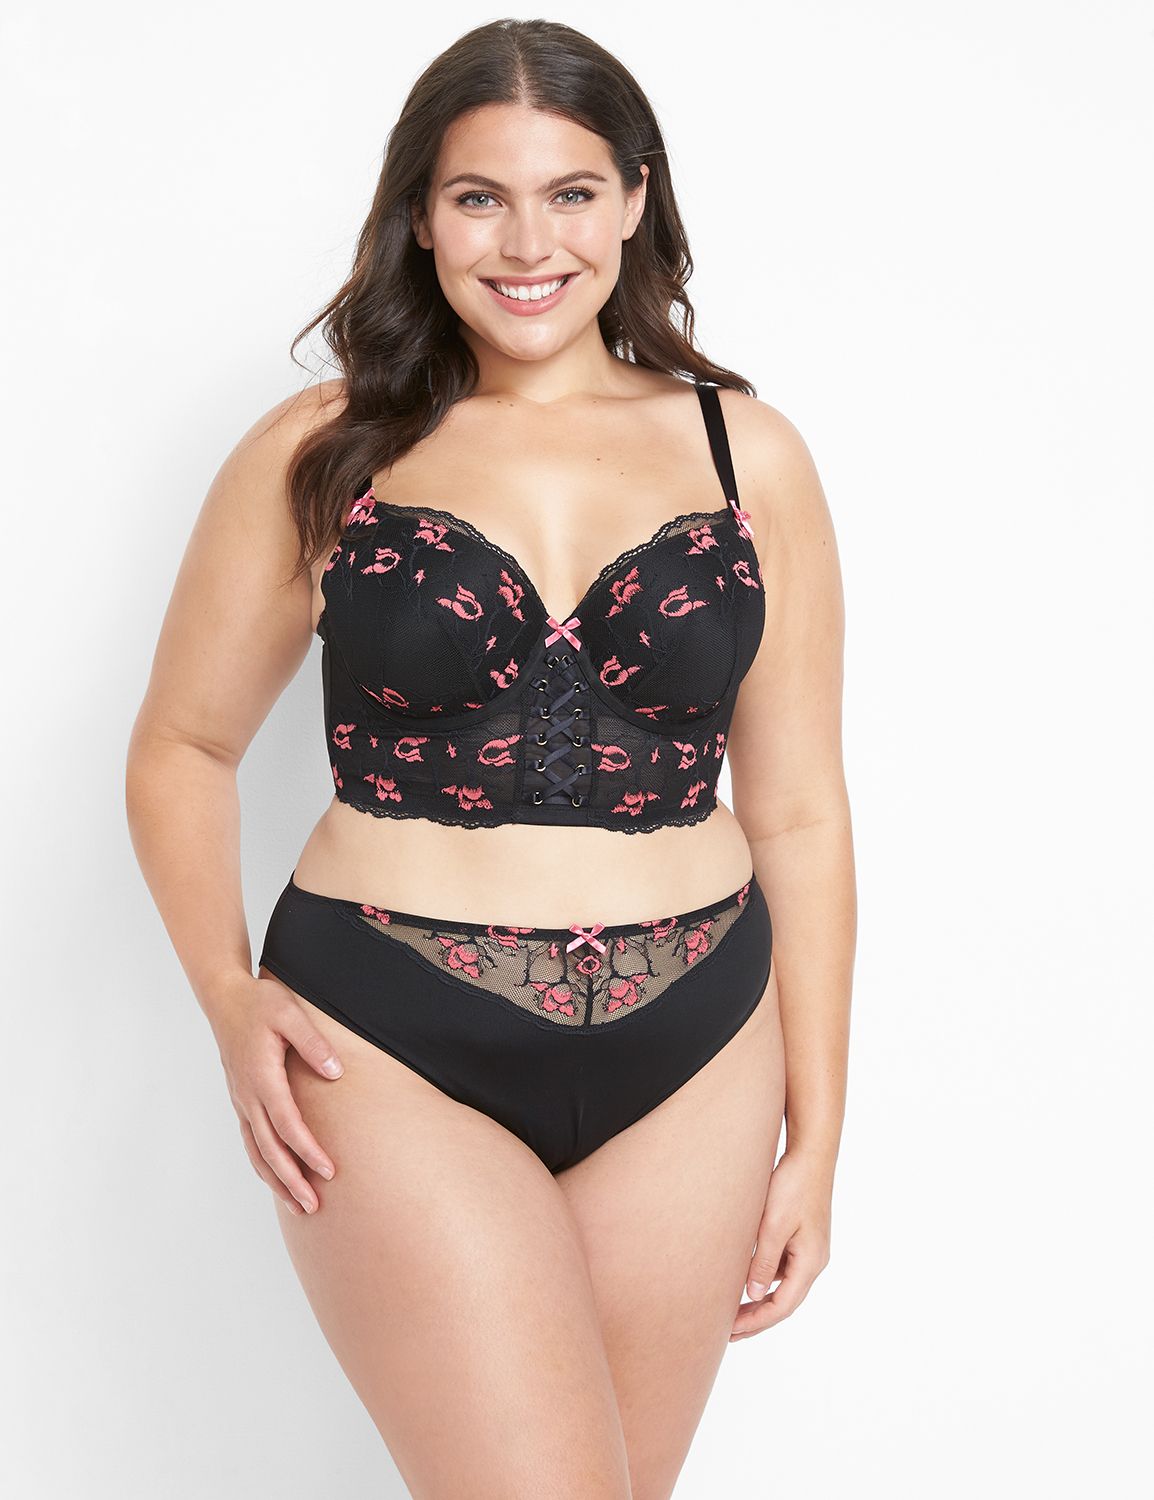 Lane Bryant - Have you heard? #Cacique bras now come in 78 sizes